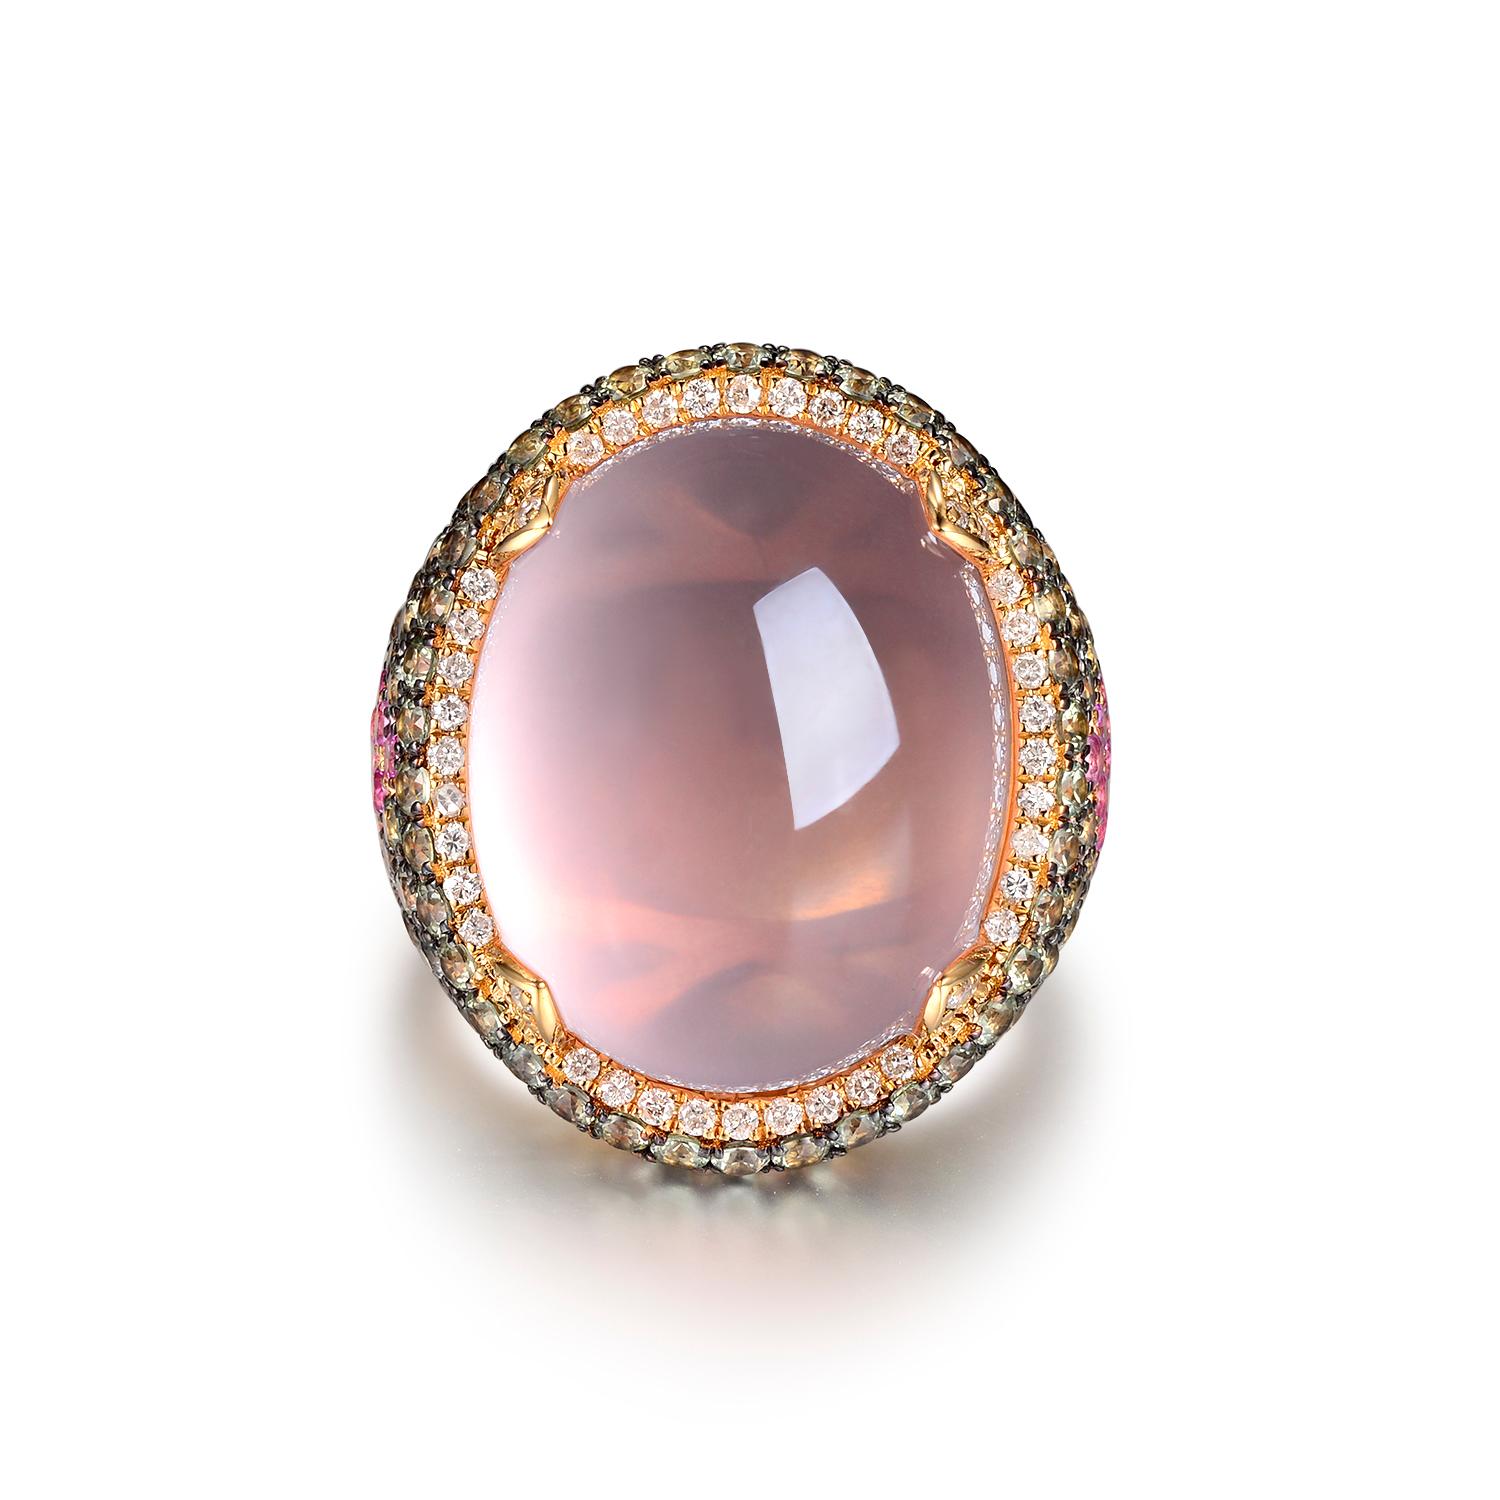 This ring features 27.95 carats of cabochon rose quartz, assented with 3.87 carats of green and pink sapphire. The shared prongs are in rhodium black gold. Prongs used to set the rose quartz are assented with 0.31 carats of white round diamonds.